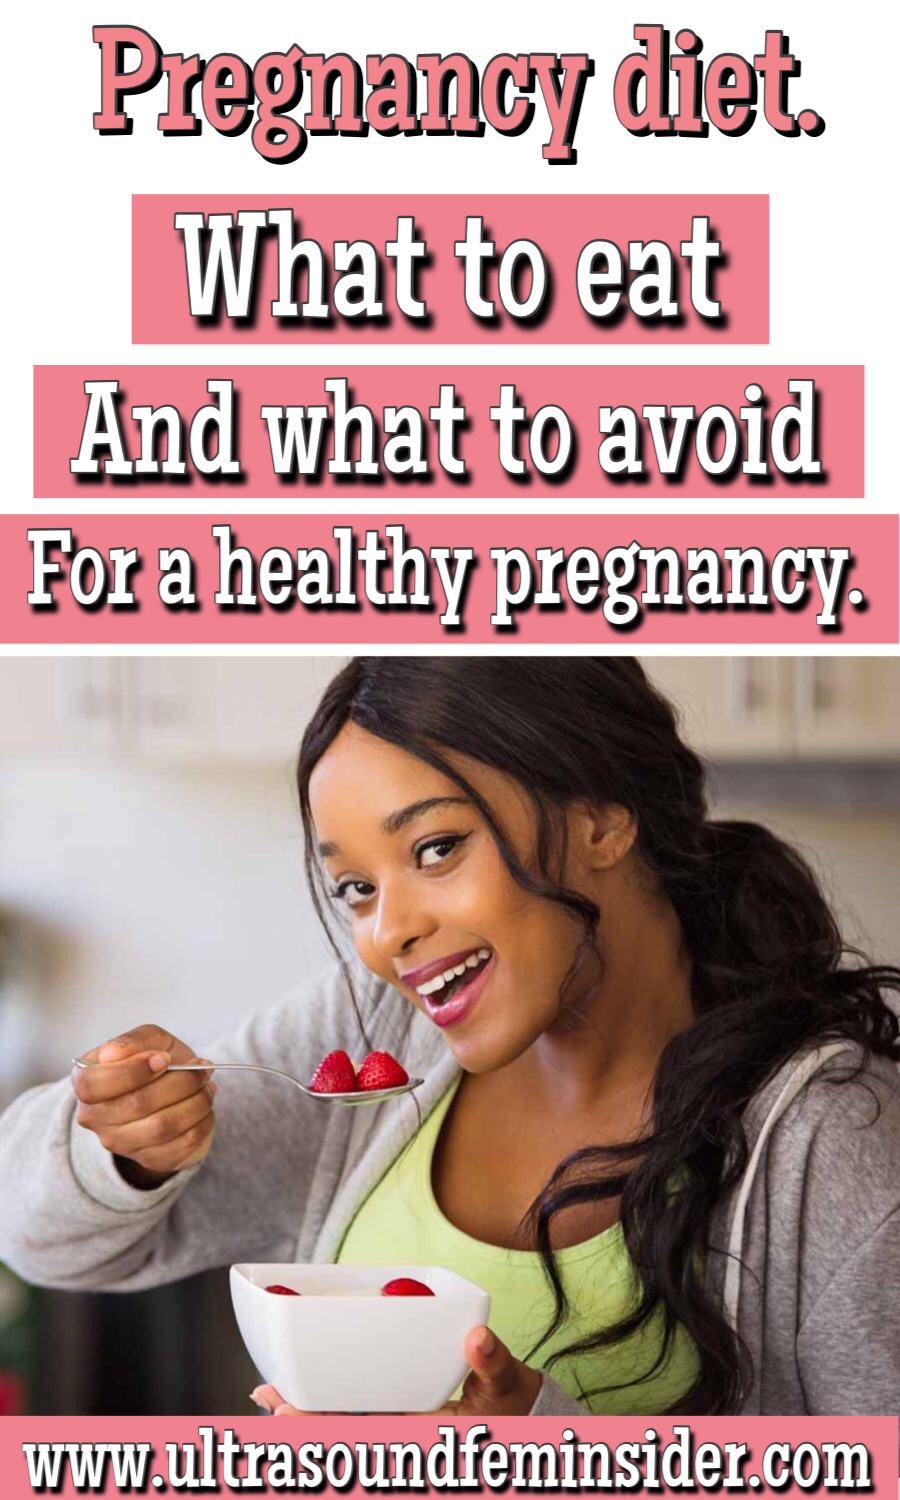 Pregnancy diet. What to eat and what yo avoid for a healthy pregnancy. 